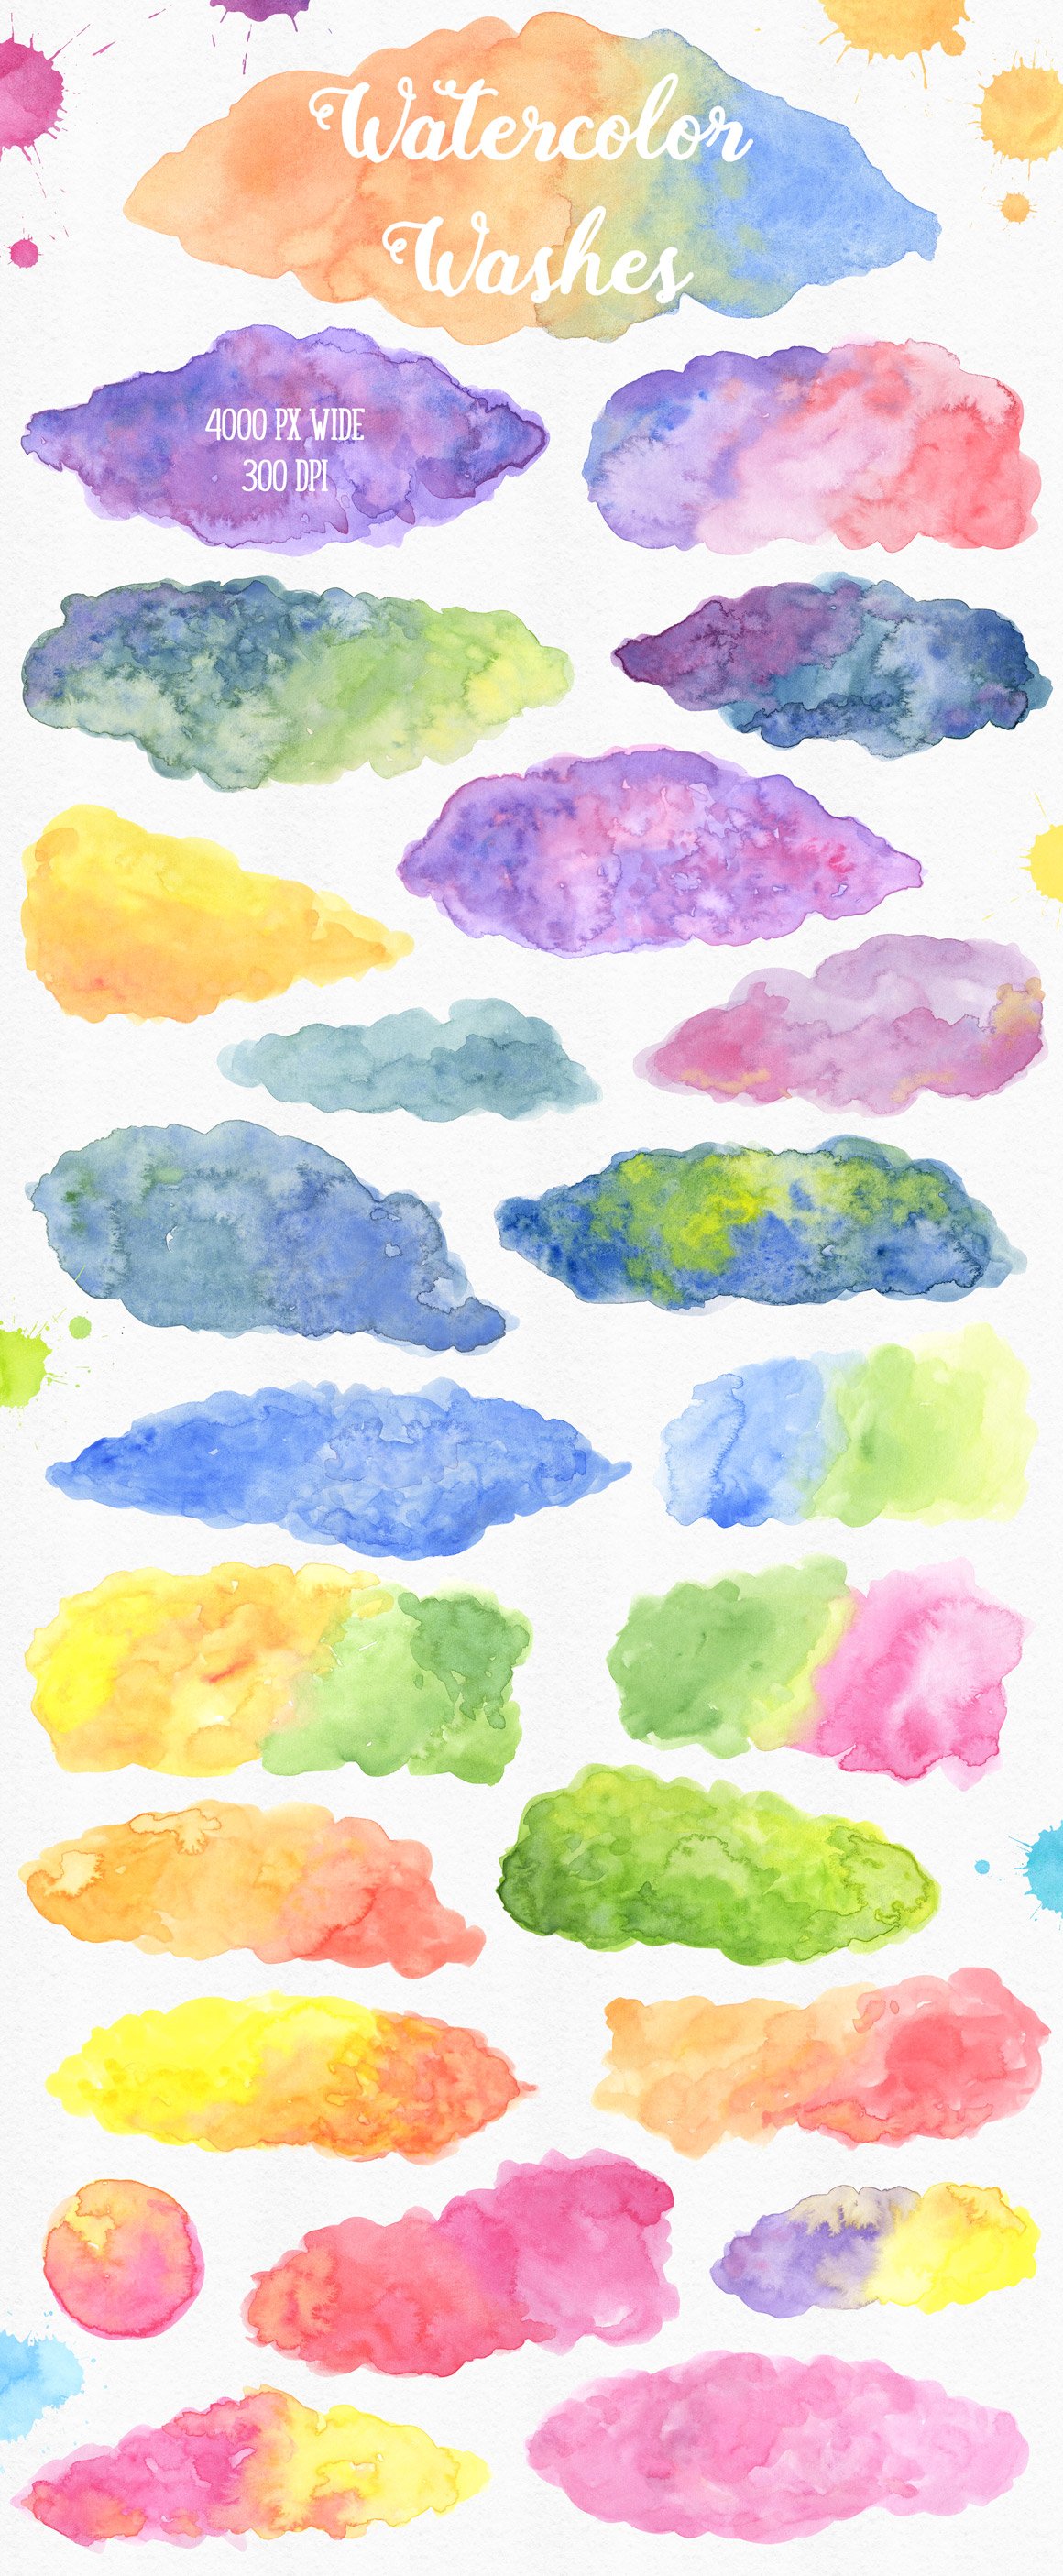 New Watercolor Texture Toolkit